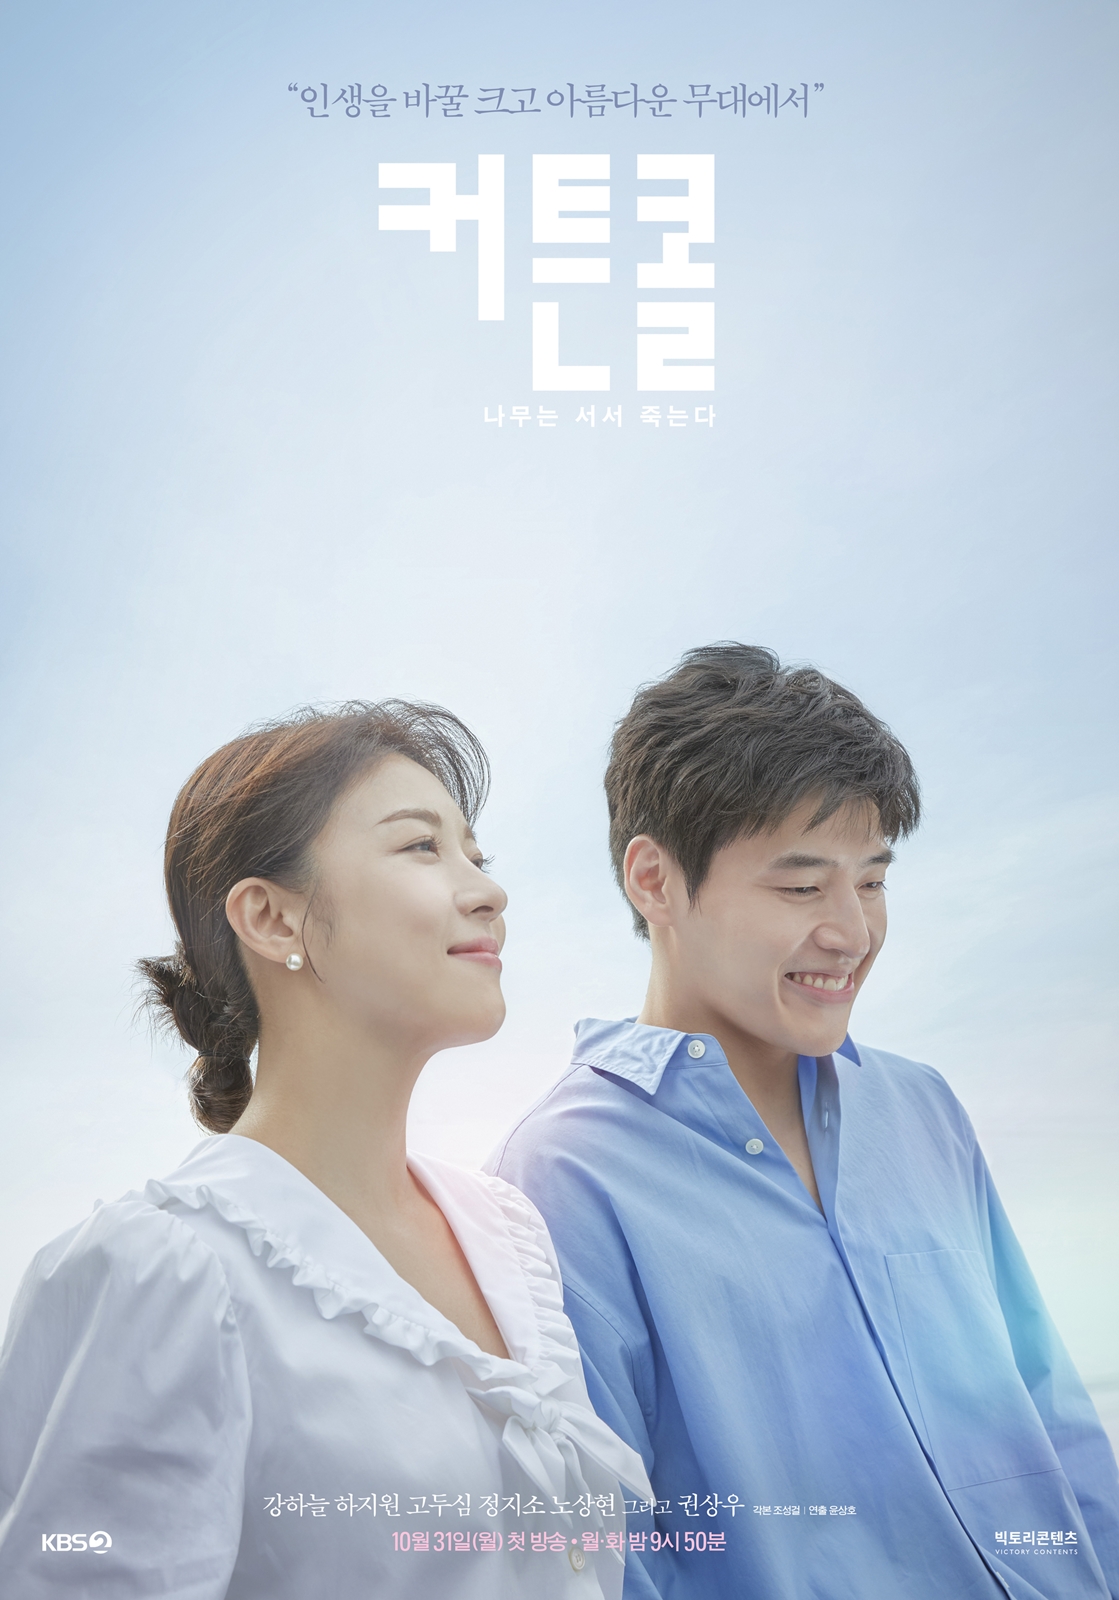 New stills and a poster for KBS's Curtain Call